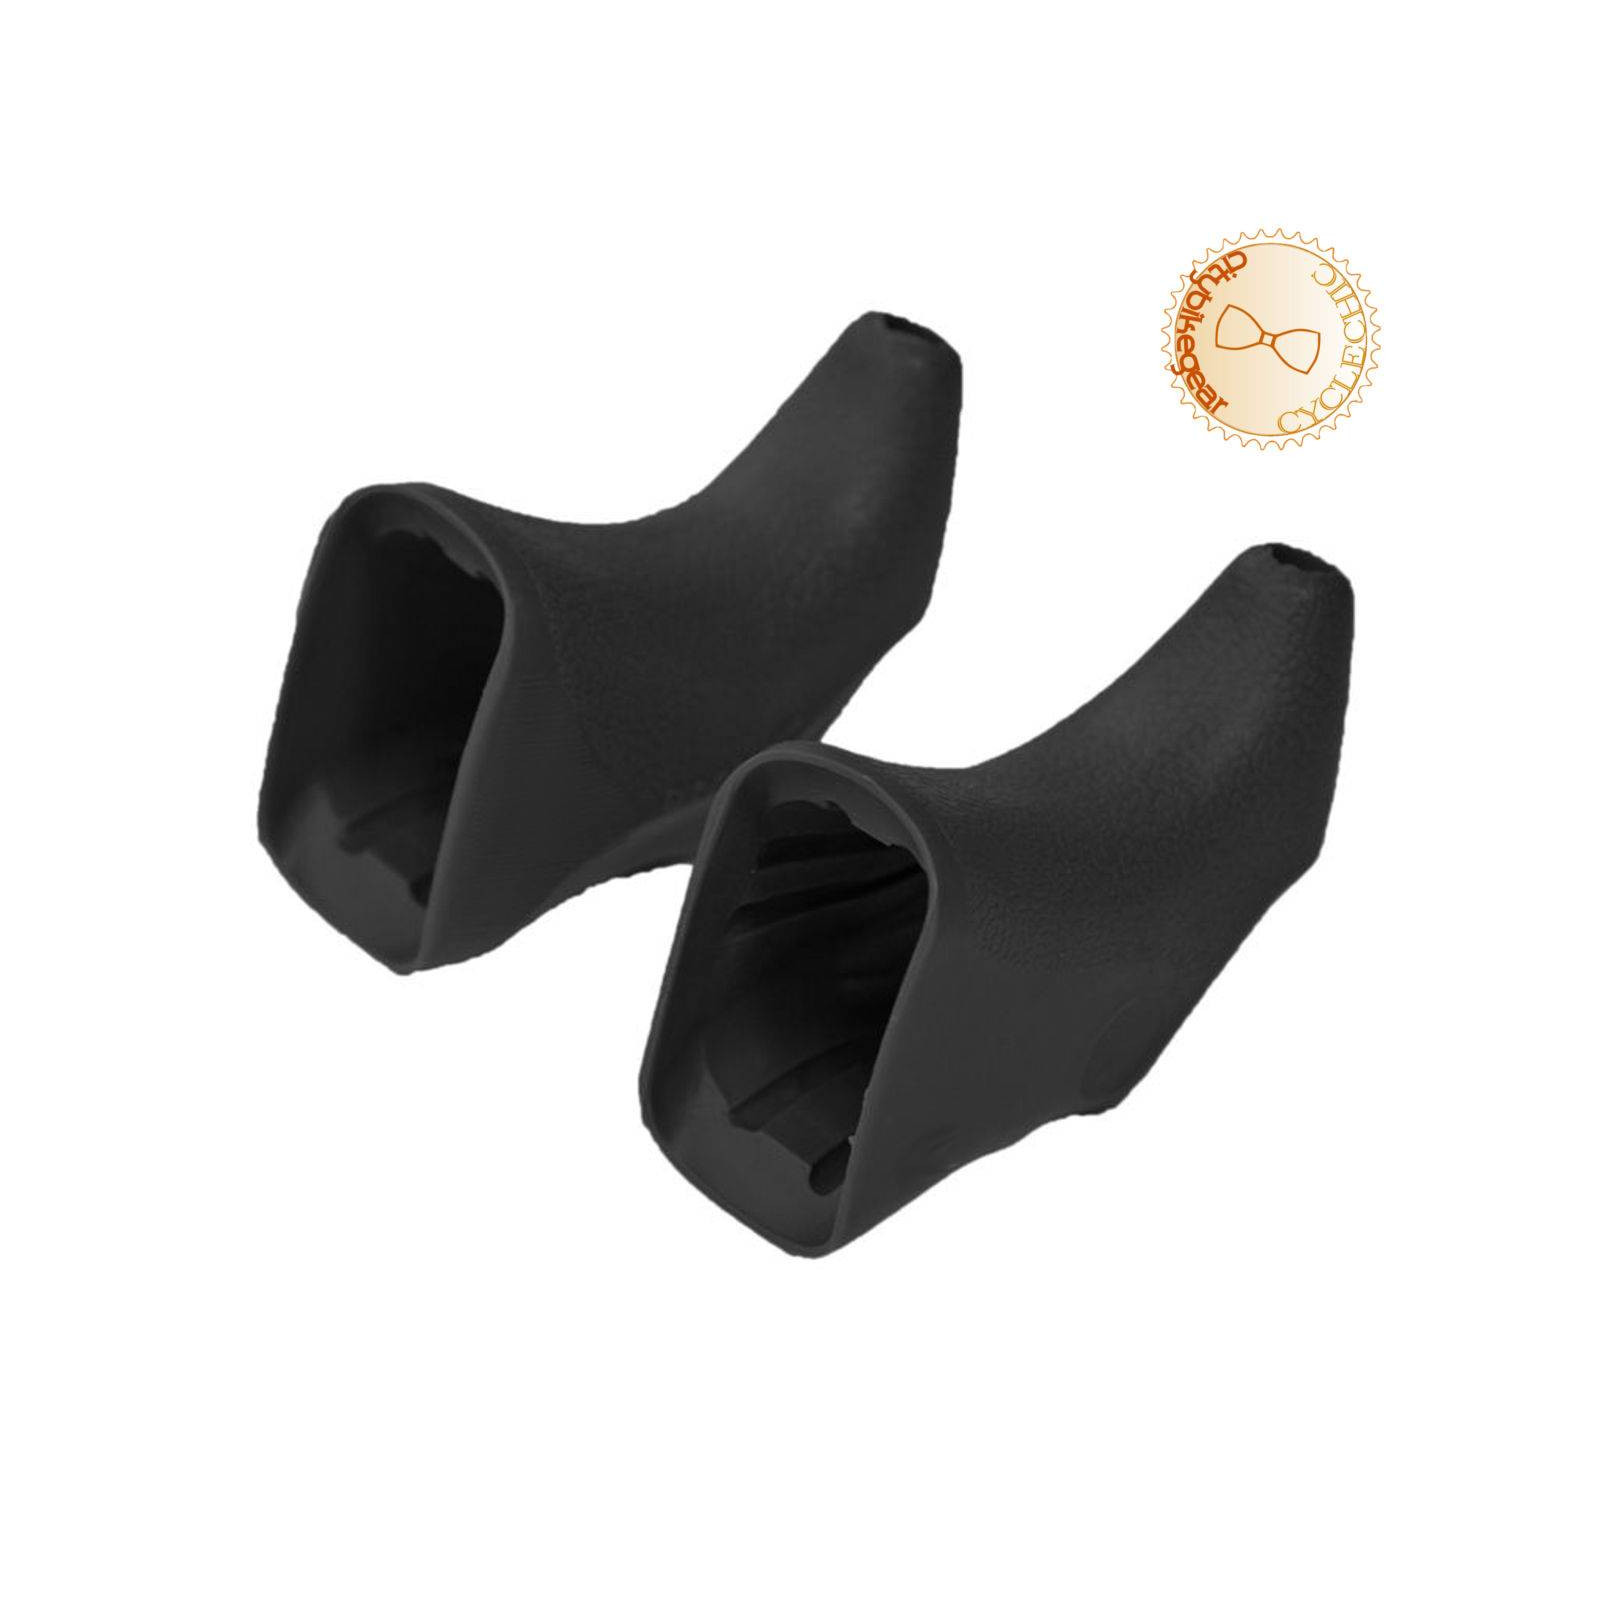 One pair of bicycle brake black rubber hoods with hole for road bikes